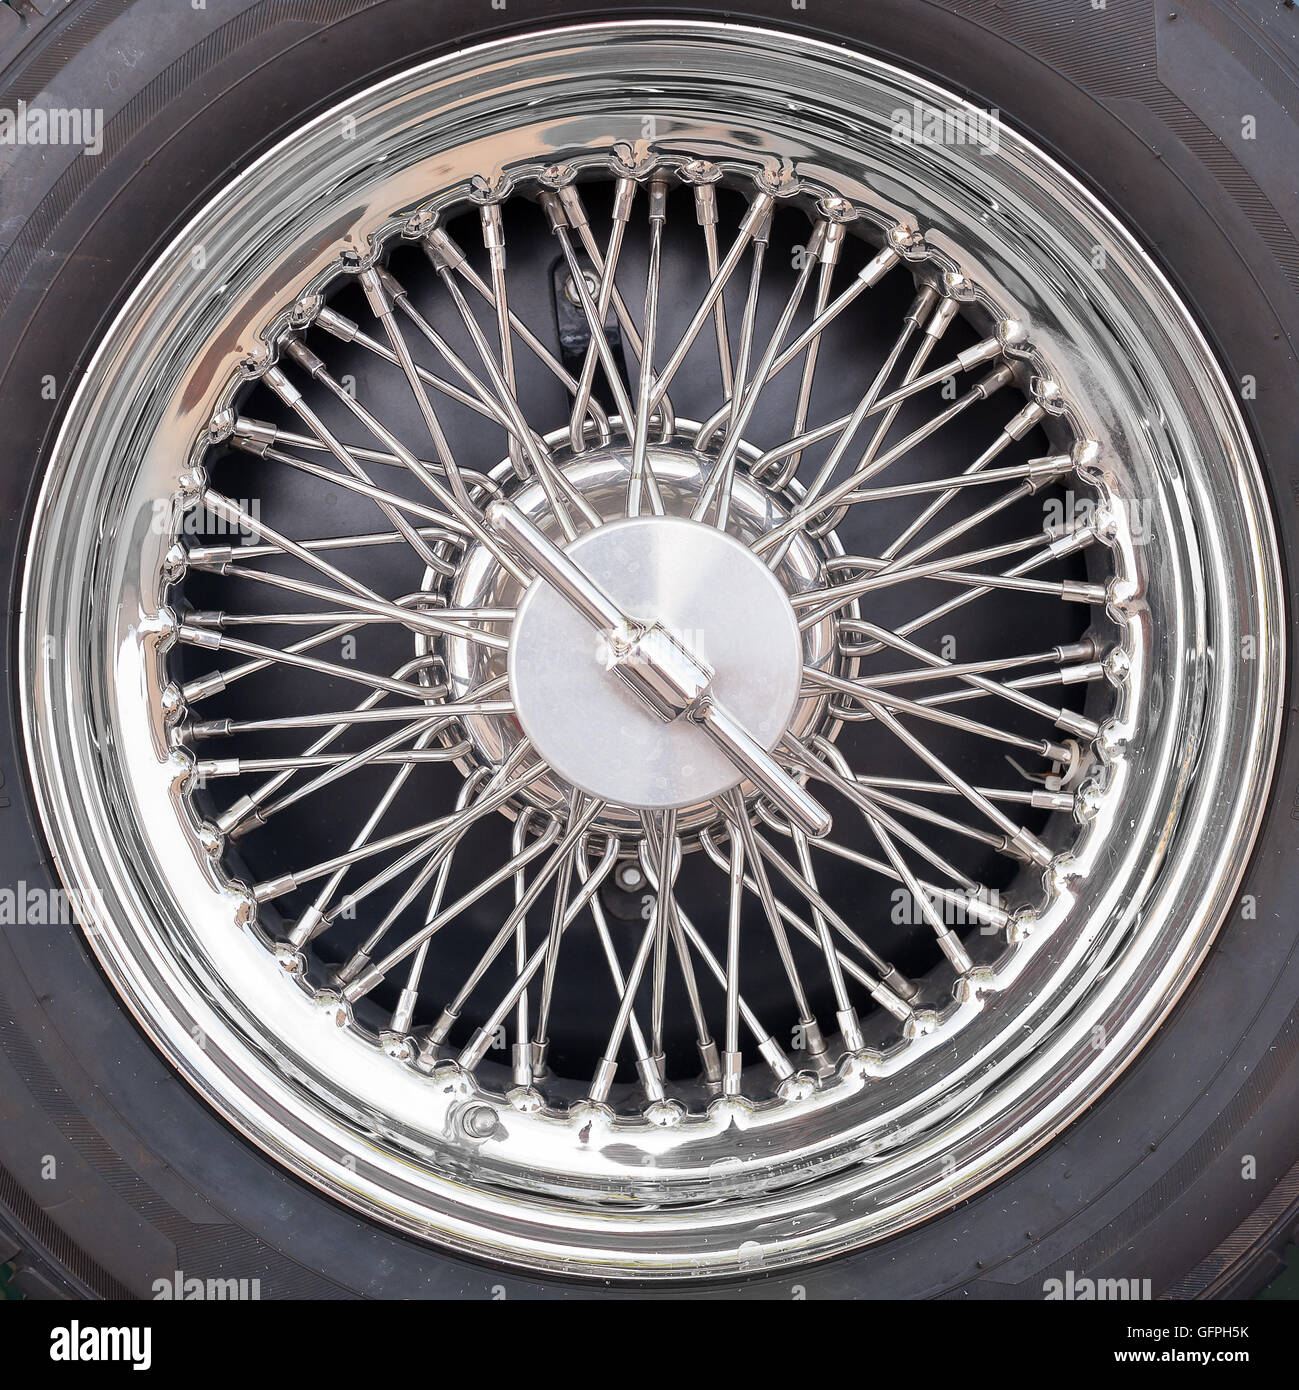 Closeup detail of an old car tire wheel with spokes Stock Photo